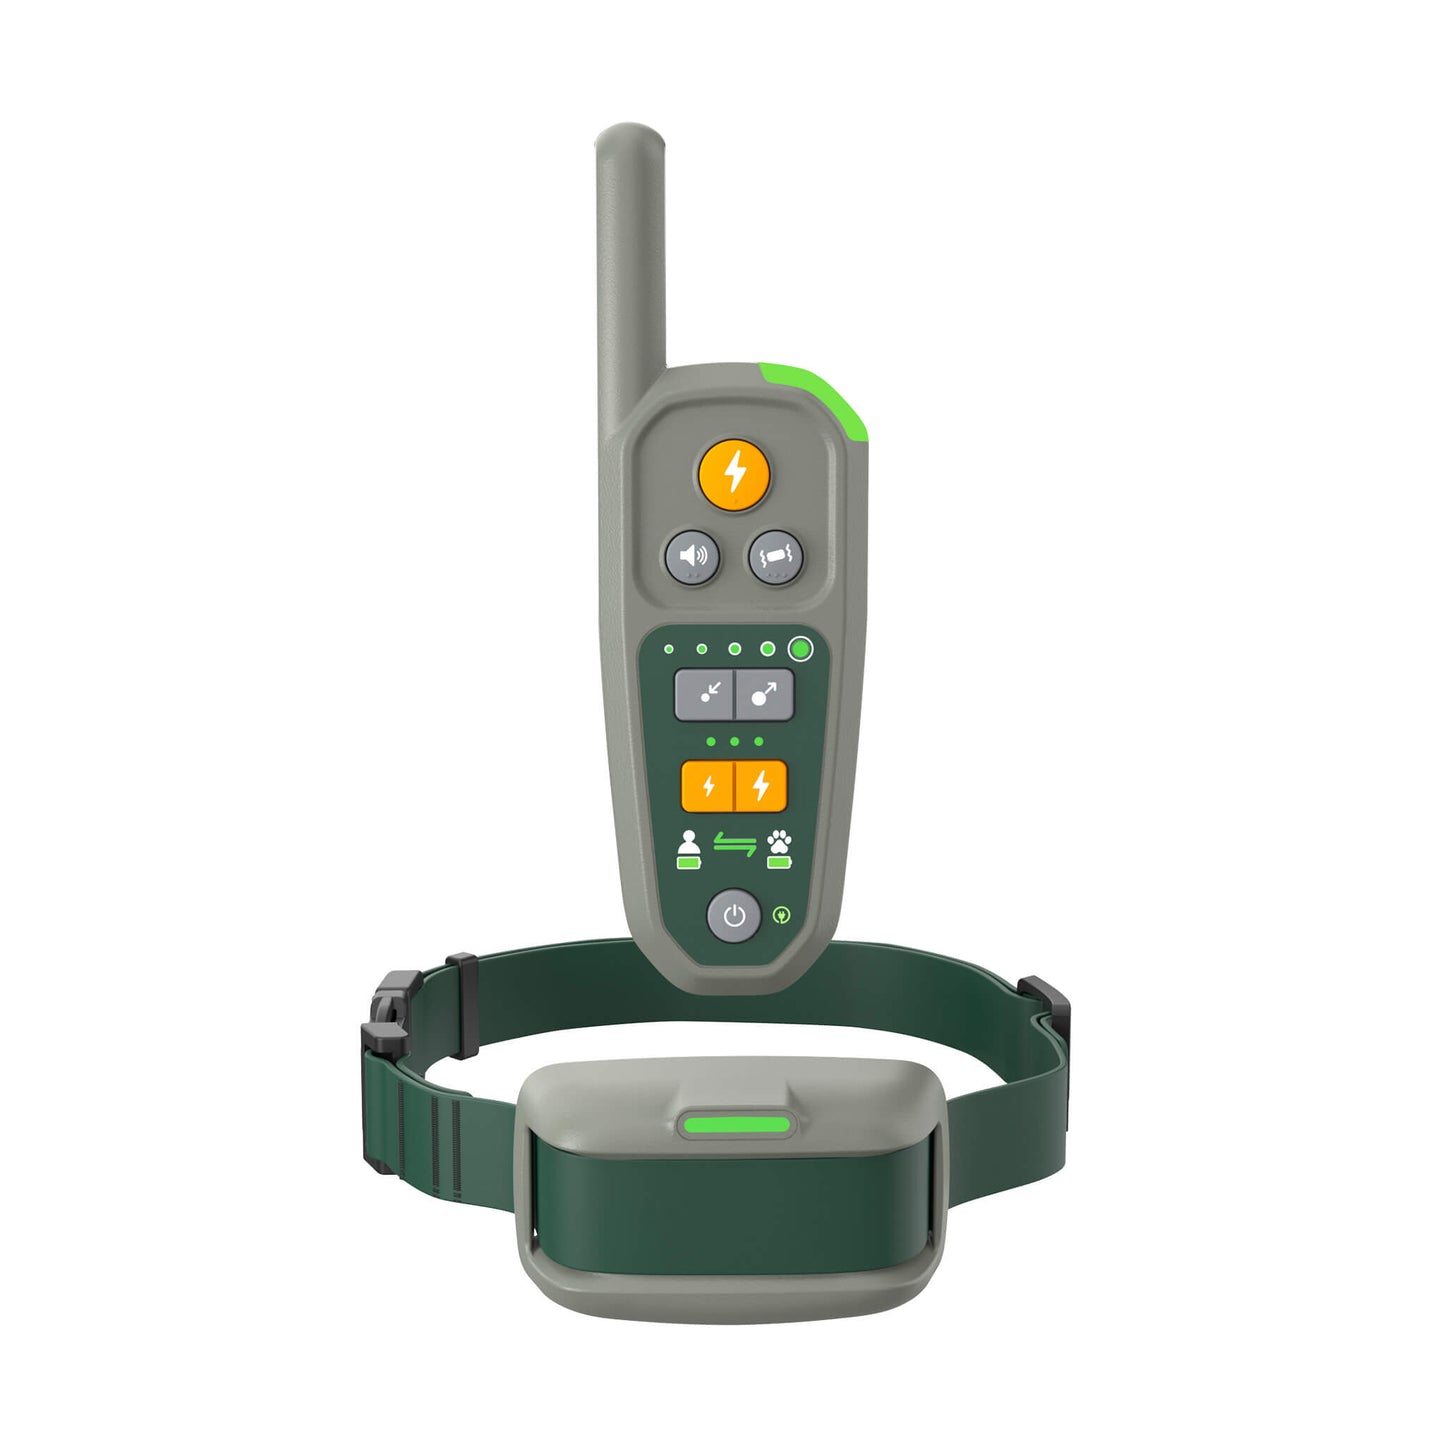 Heel™ ROAM 350™ Remote hovering over the training collar with active connection lights on